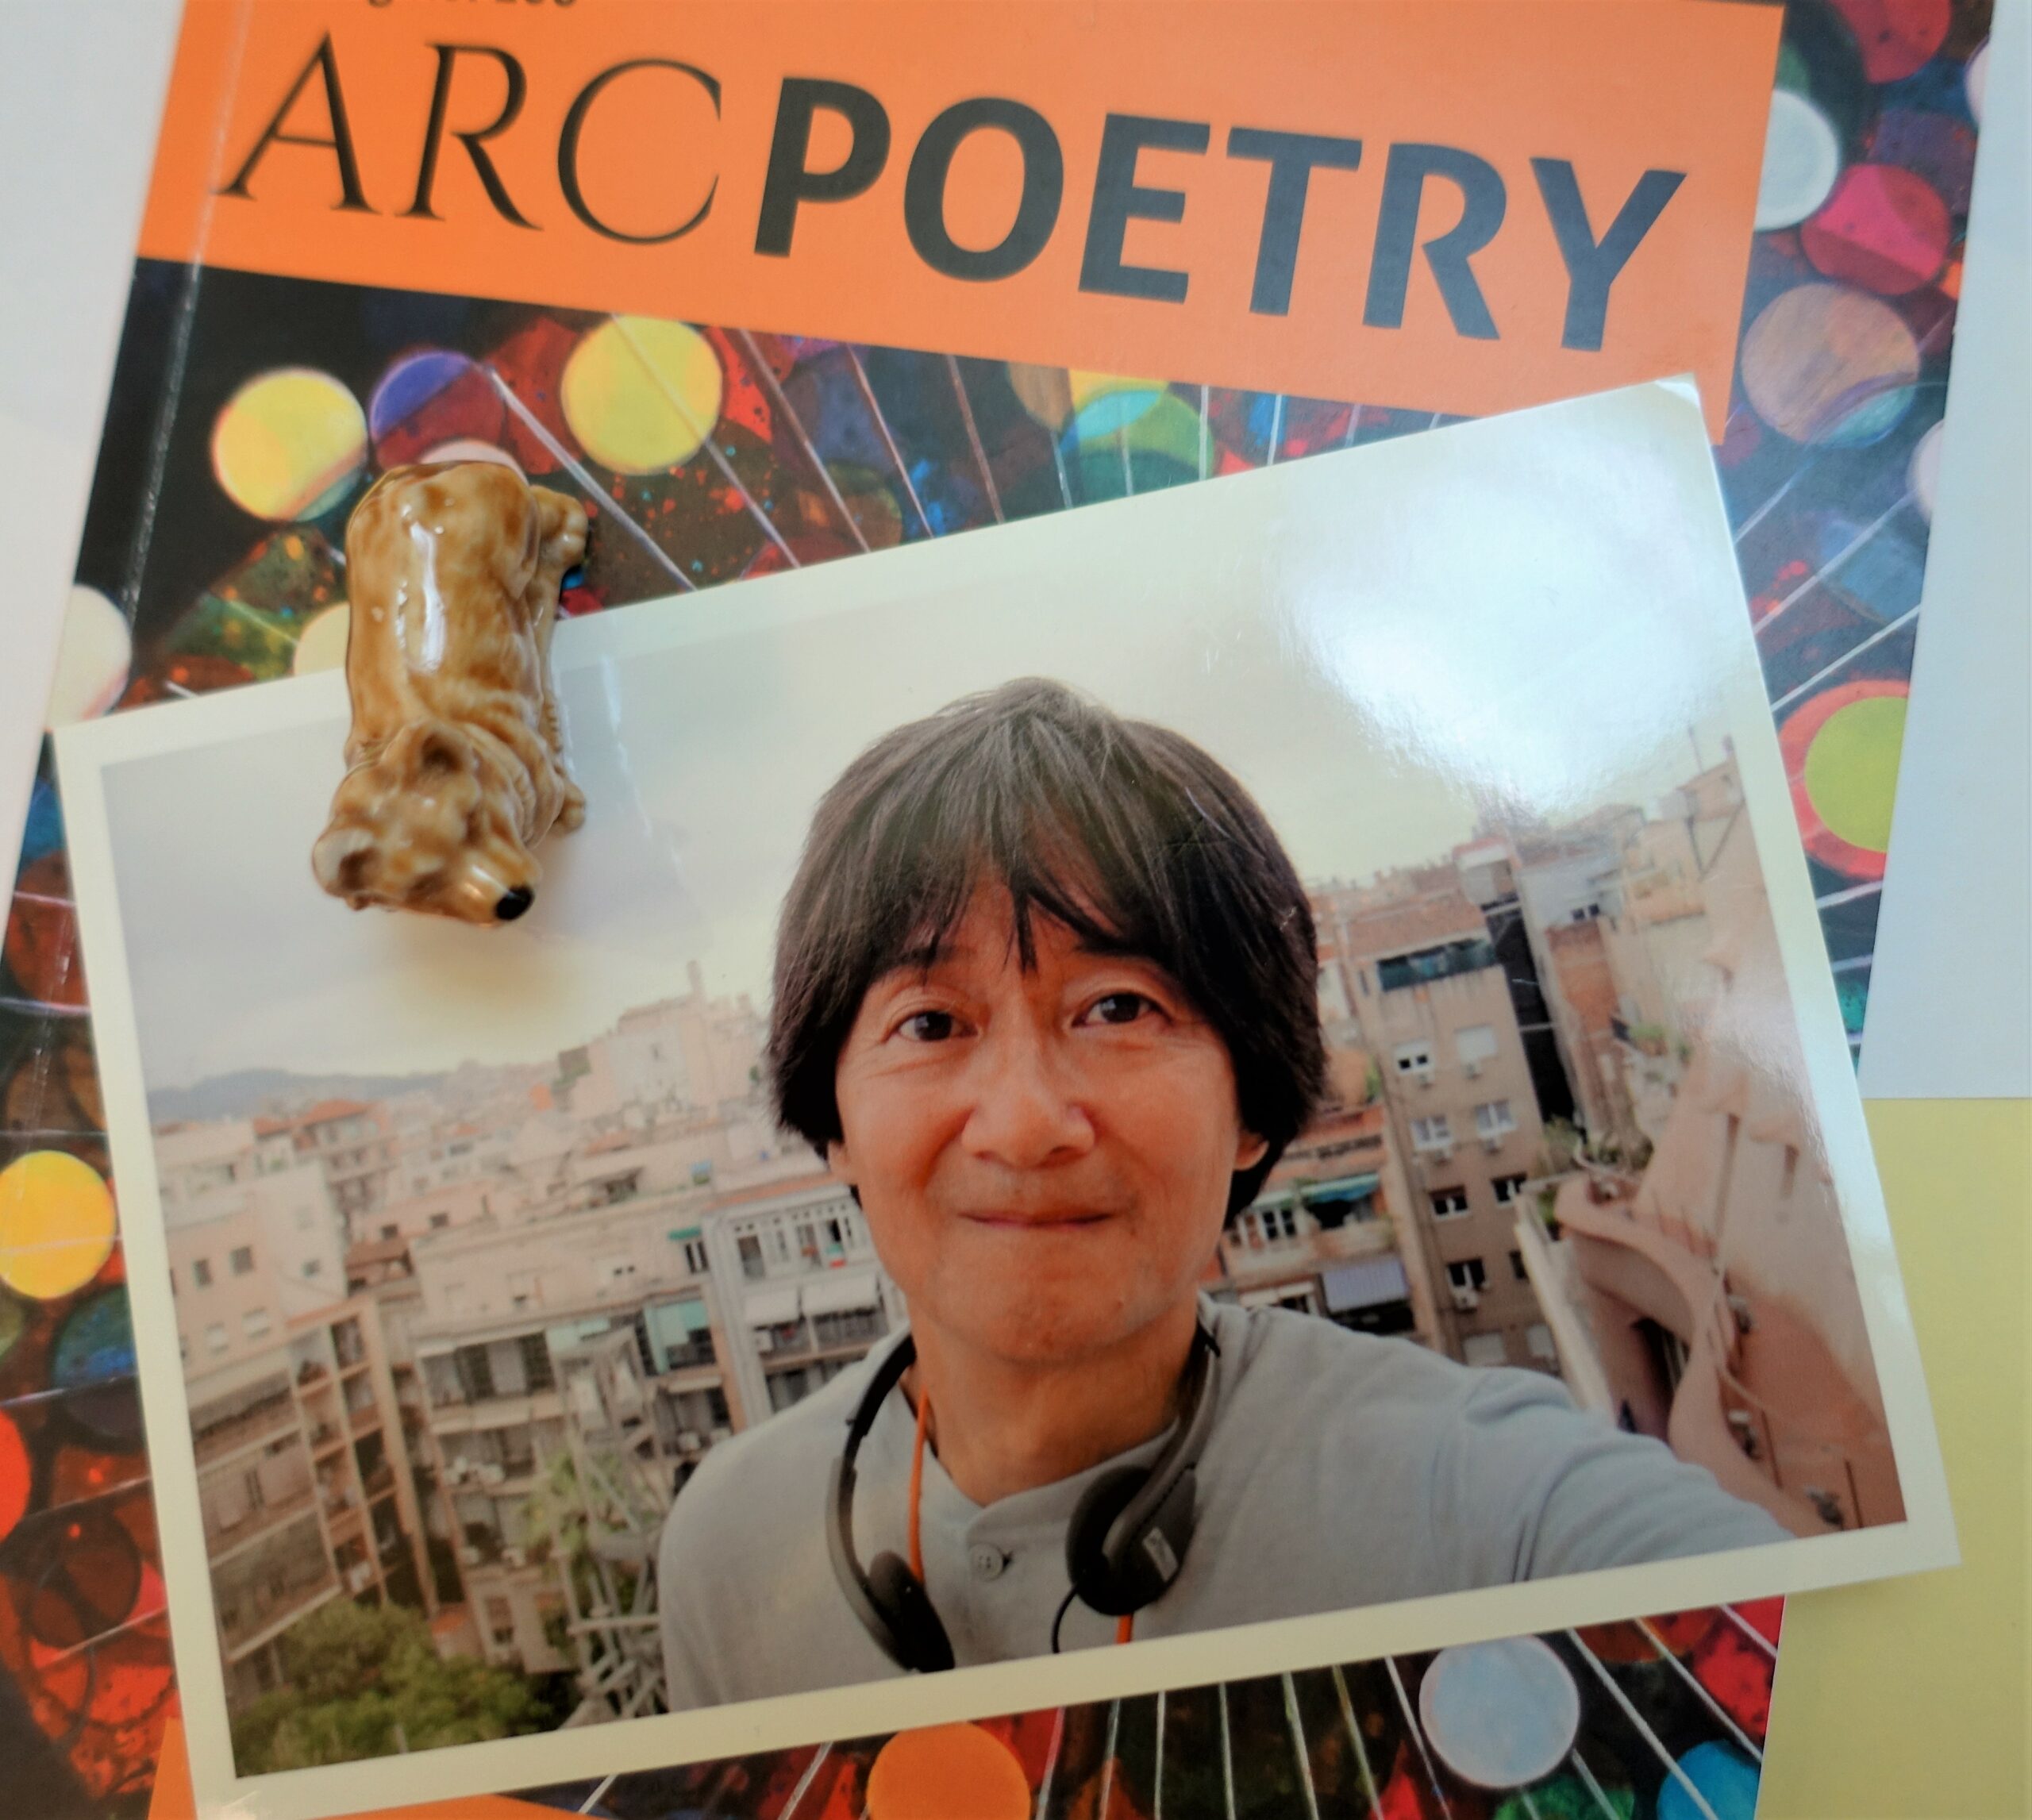 Kevin Irie's photo appears with an Award of Awesomeness doo-dad and issue #100 of Arc Poetry Magazine